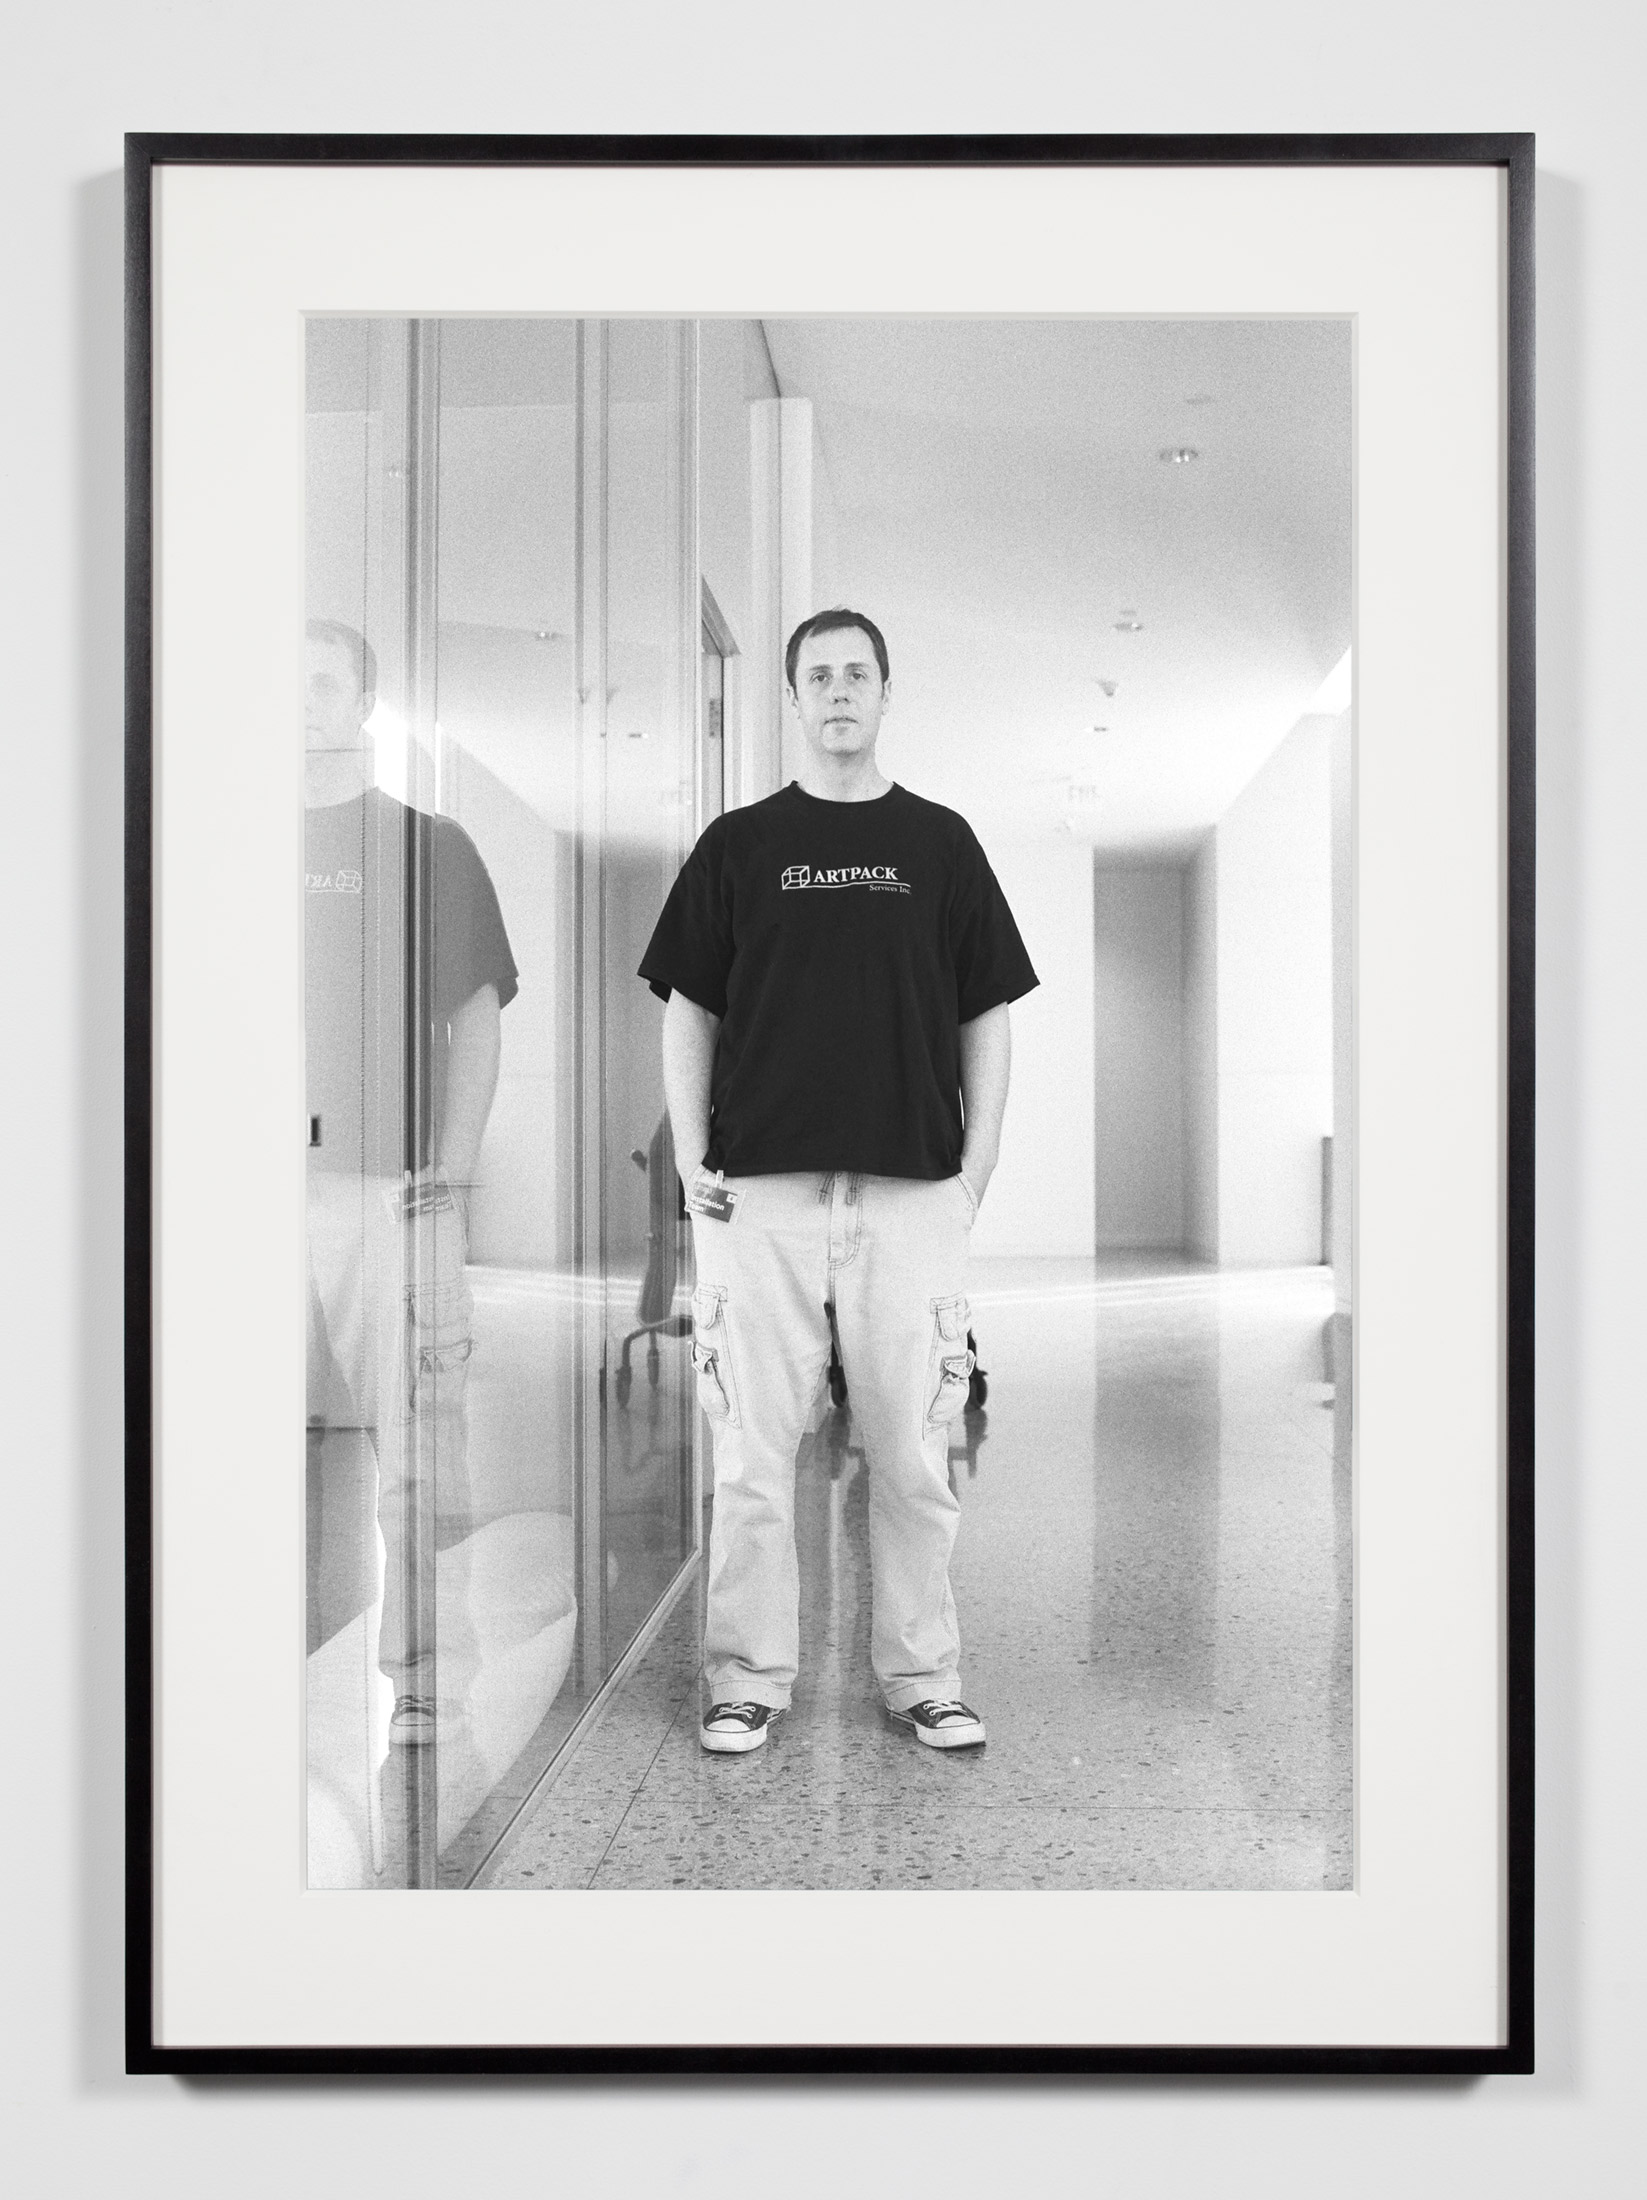   University Museum Preparator, Ann Arbor, Michigan, March 27, 2009    2011   Epson Ultrachrome K3 archival ink jet print on Hahnemühle Photo Rag paper  36 3/8 x 26 3/8 inches   Industrial Portraits, 2008–     